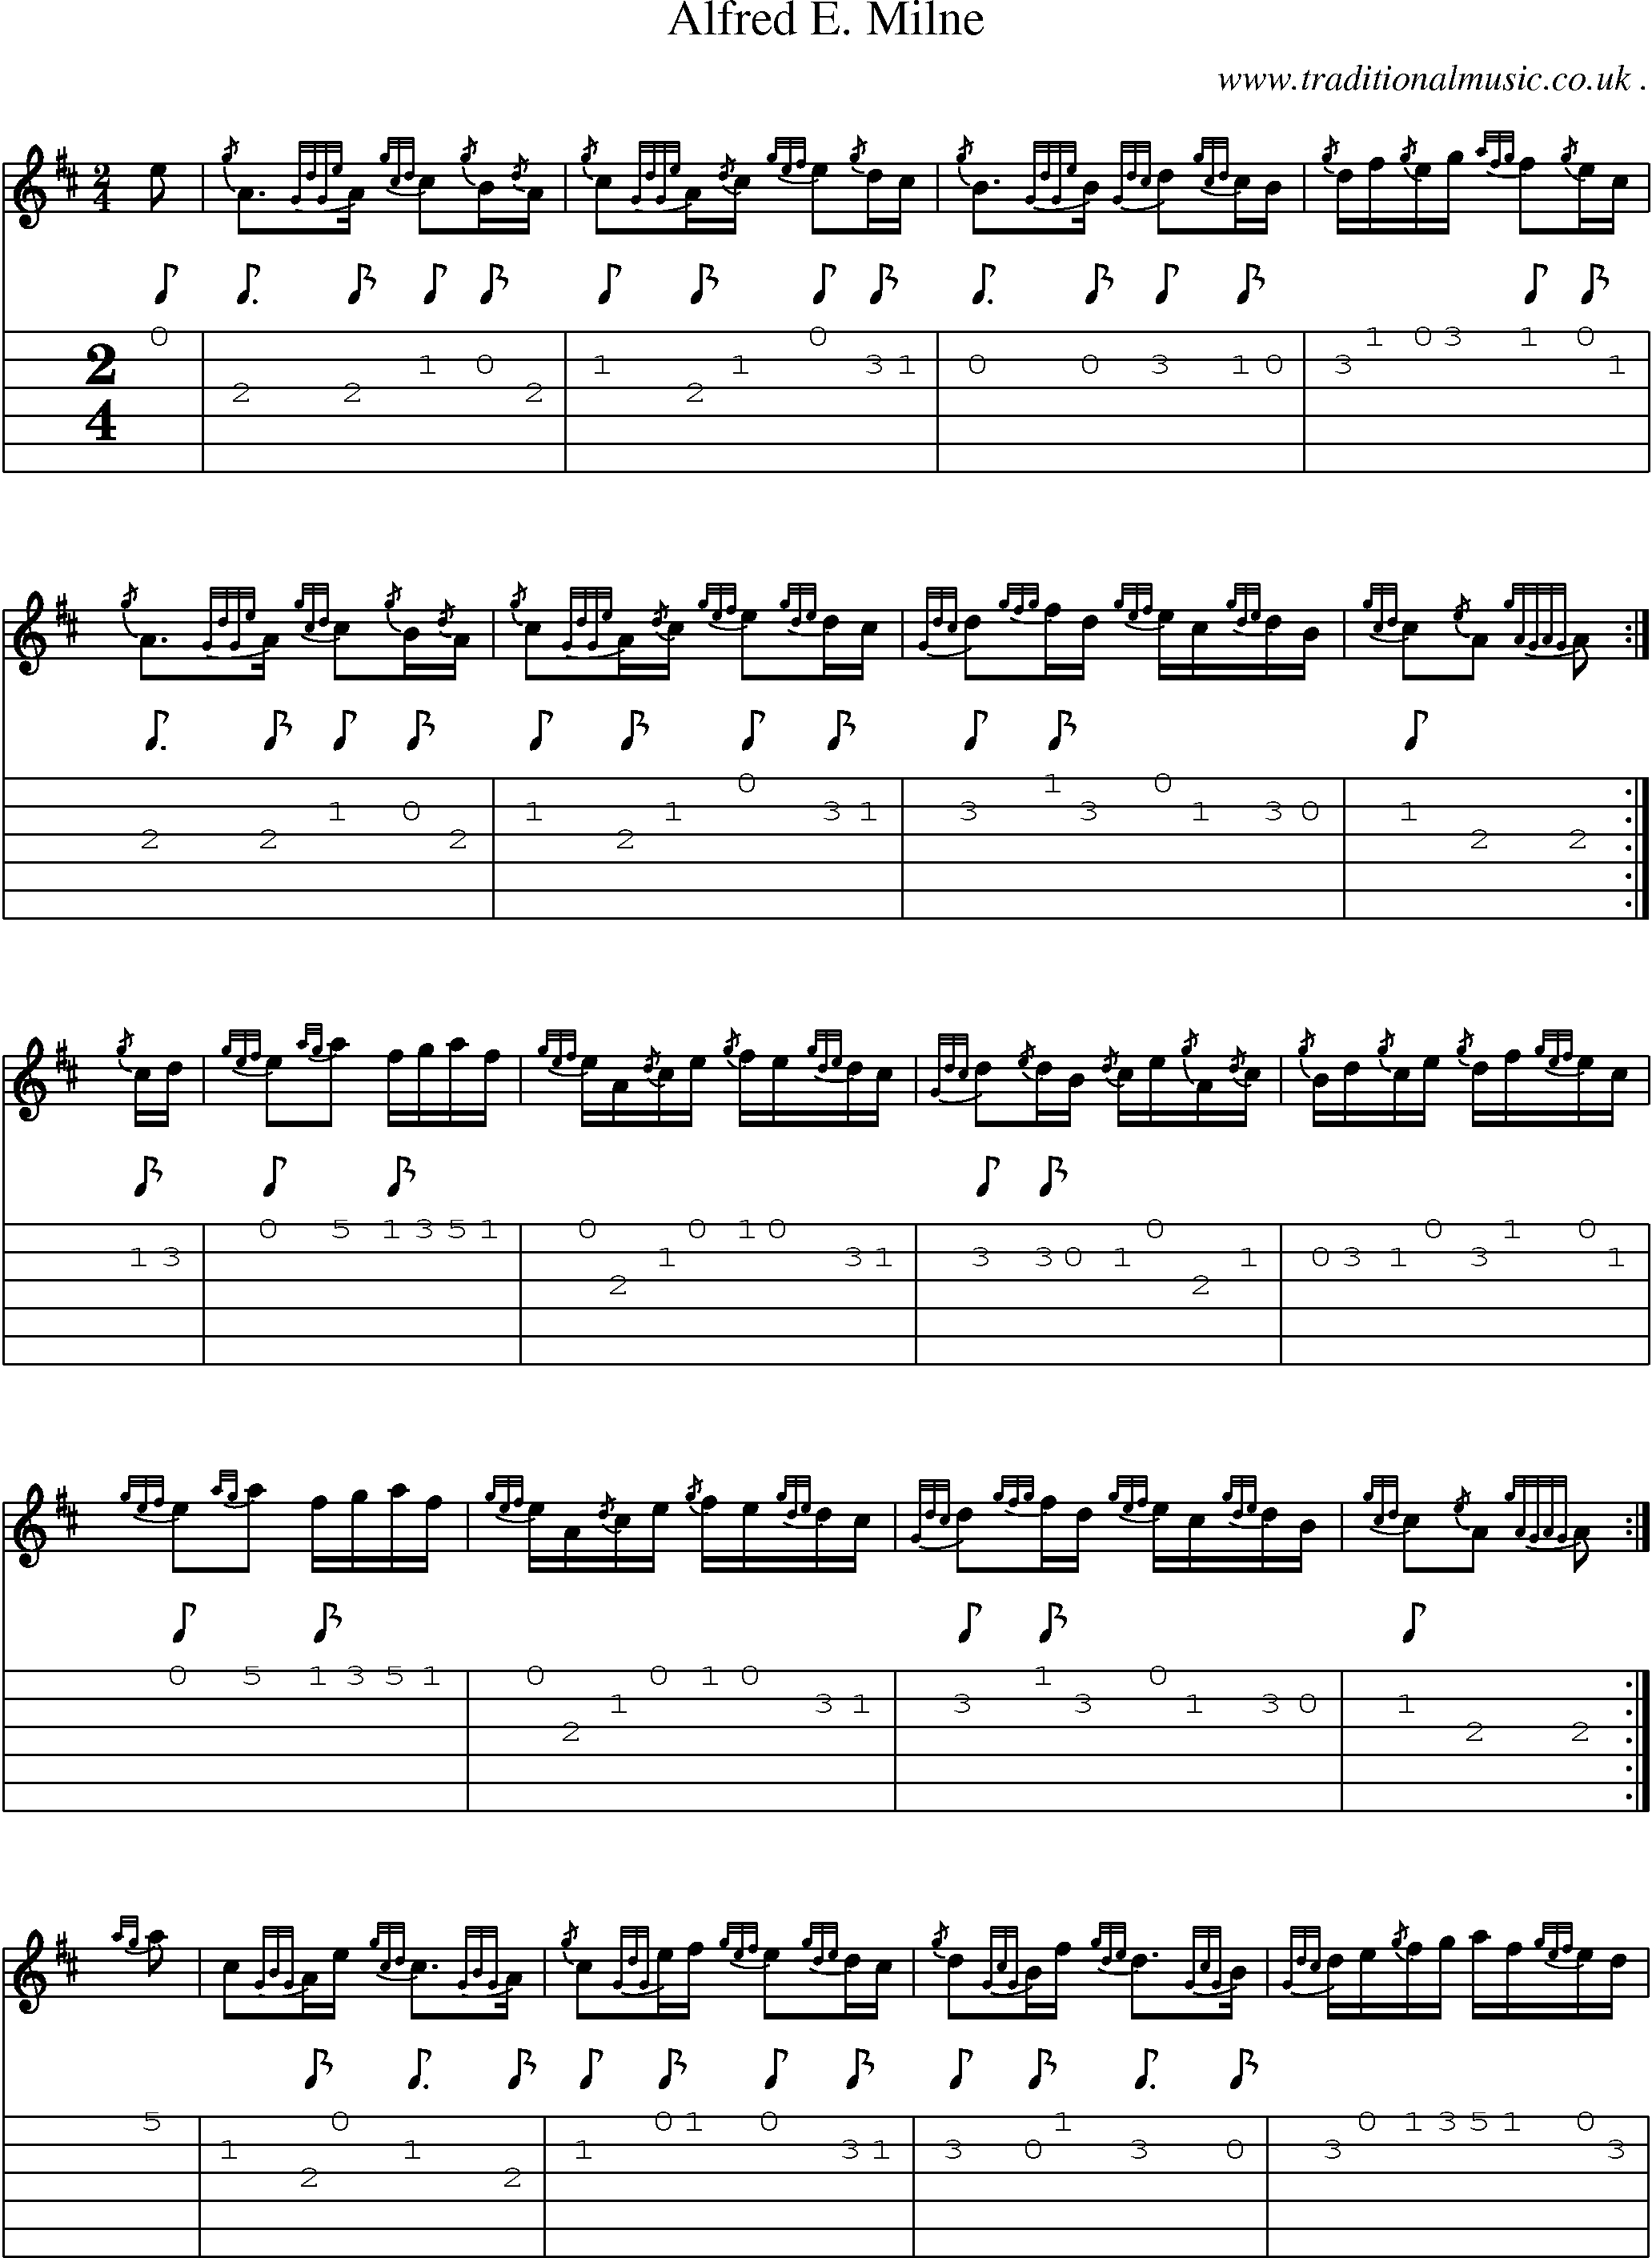 Sheet-music  score, Chords and Guitar Tabs for Alfred E Milne